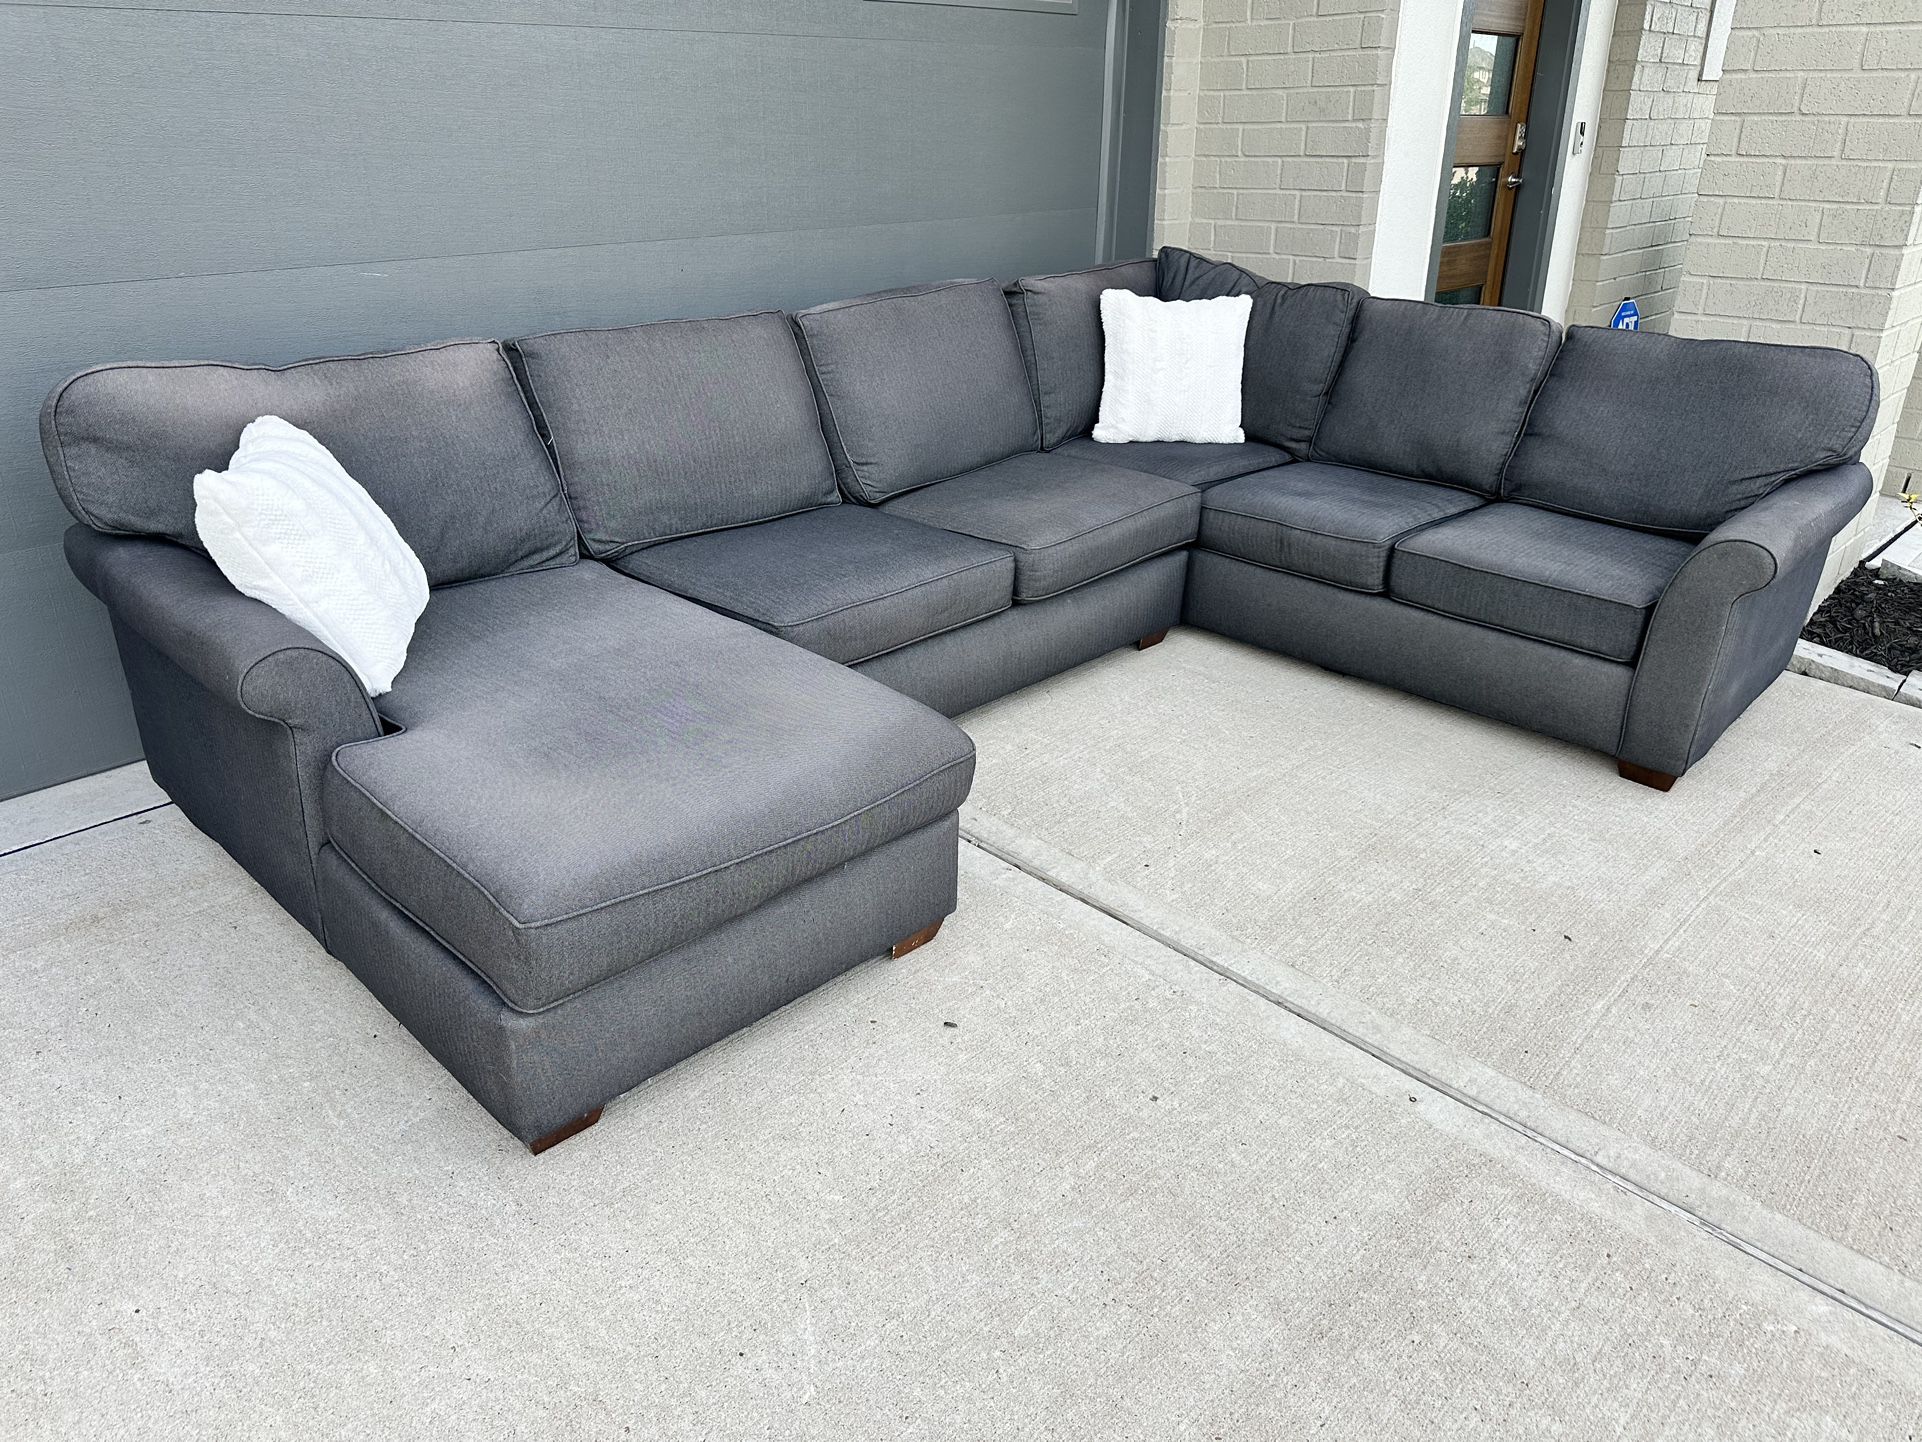 Gorgeous Havertys Oversized Sectional Couch - 🚚Delivery Available 